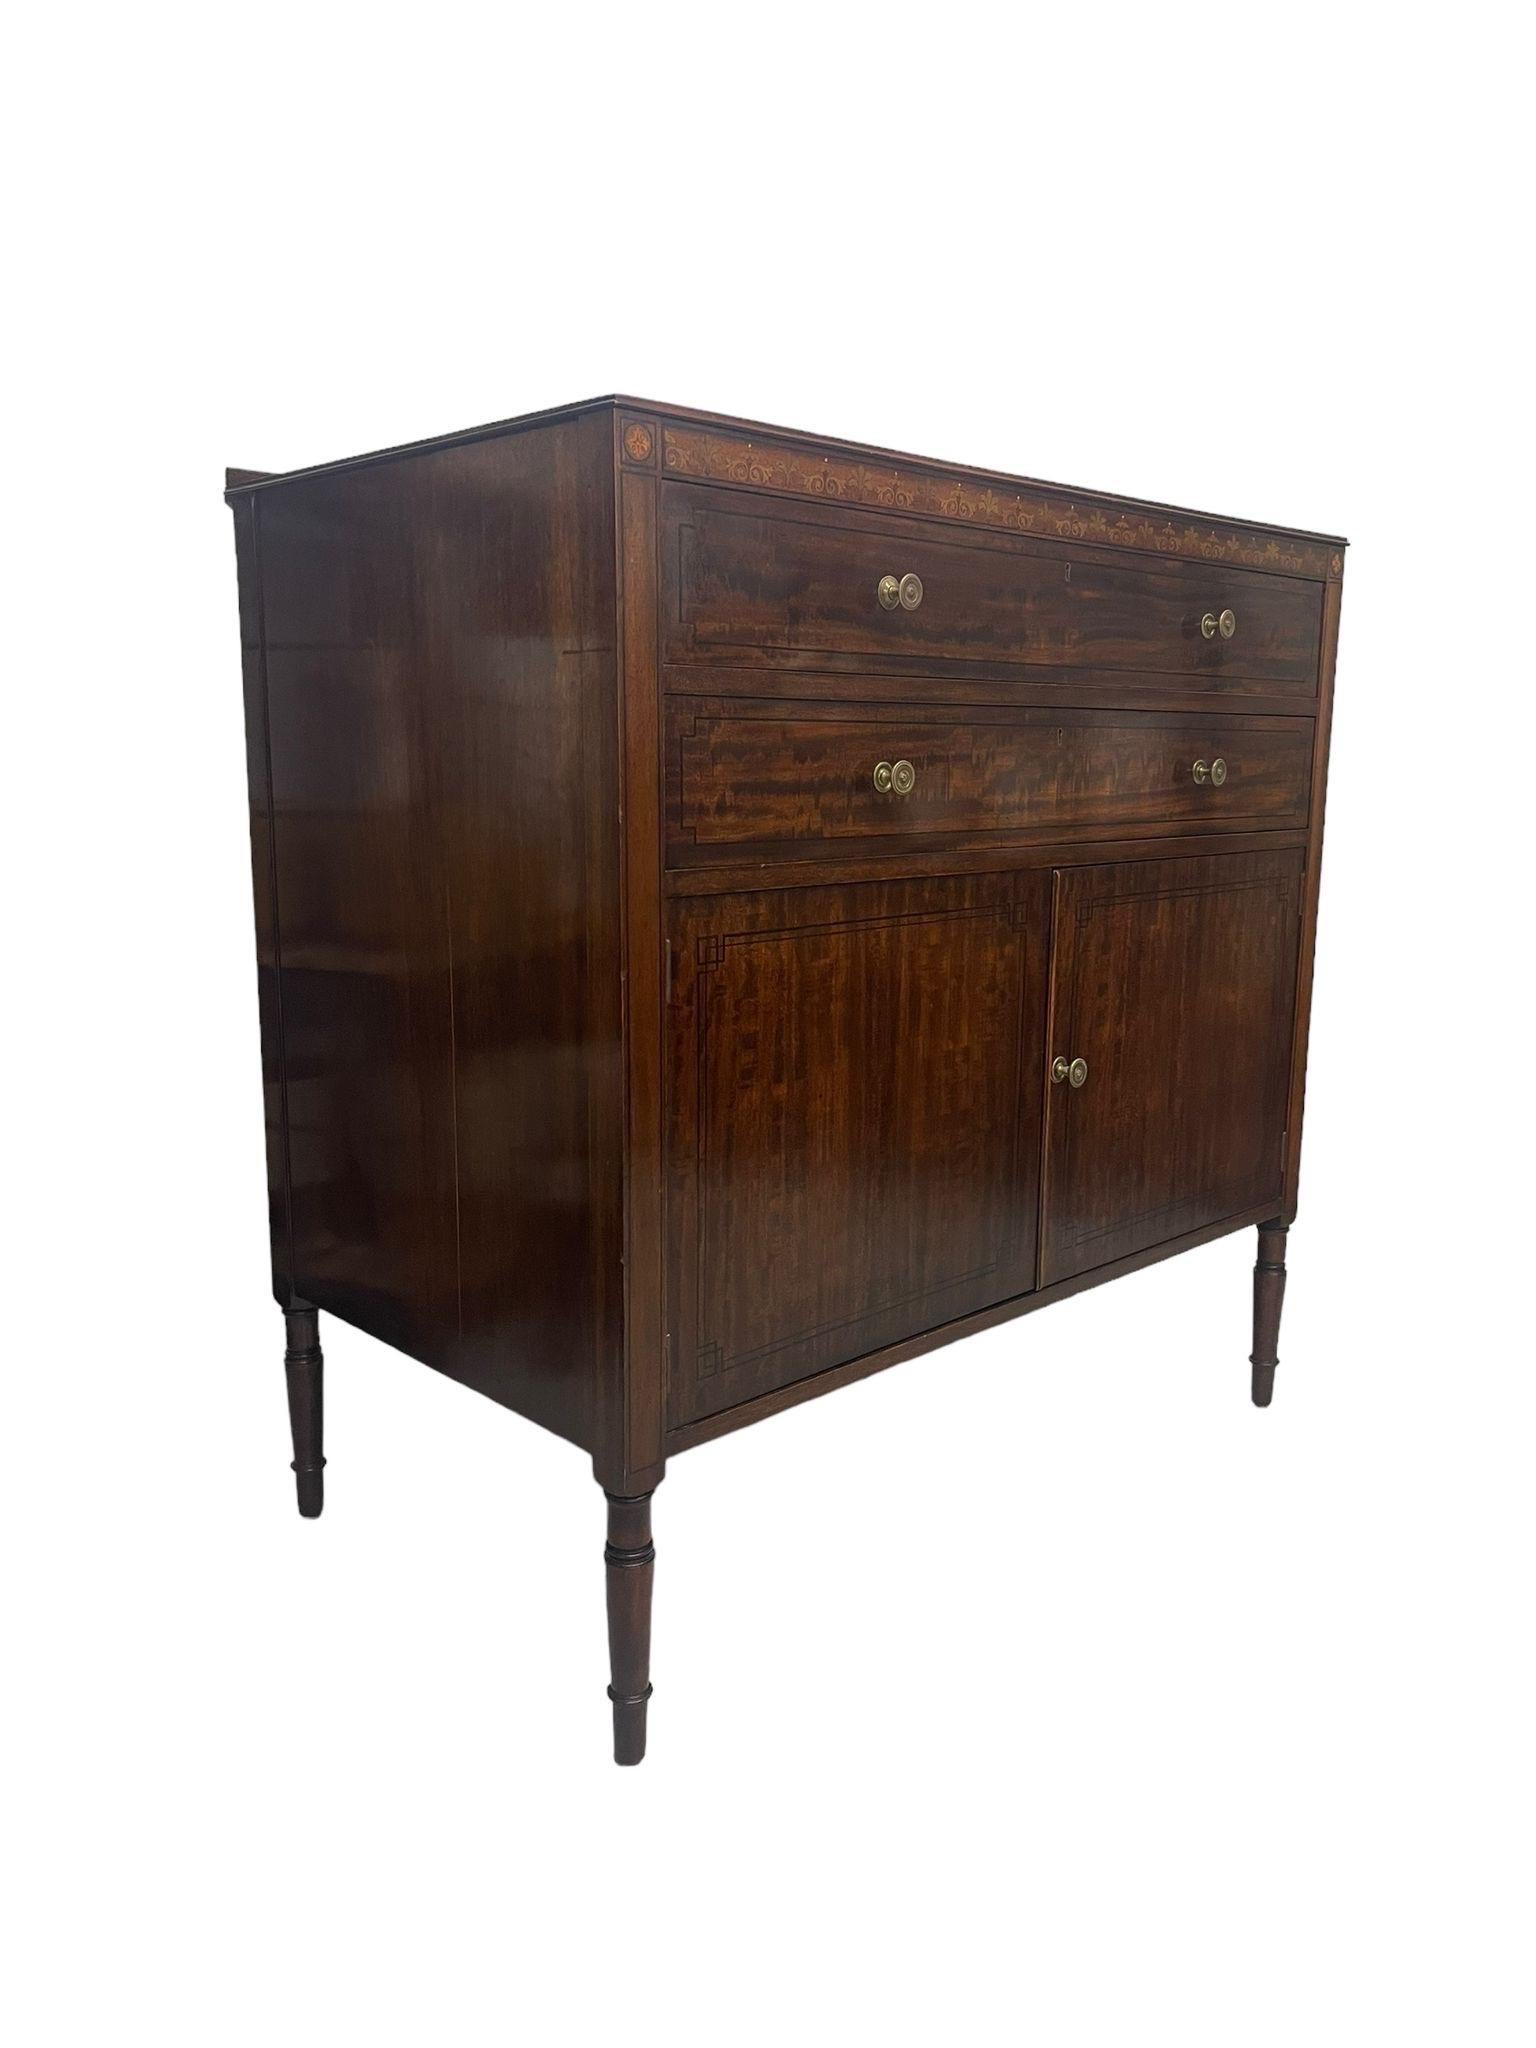 Early 20th Century Antique Edwardian Cabinet Buffet With Wood Inlay. Uk Import.Circa 1905 For Sale